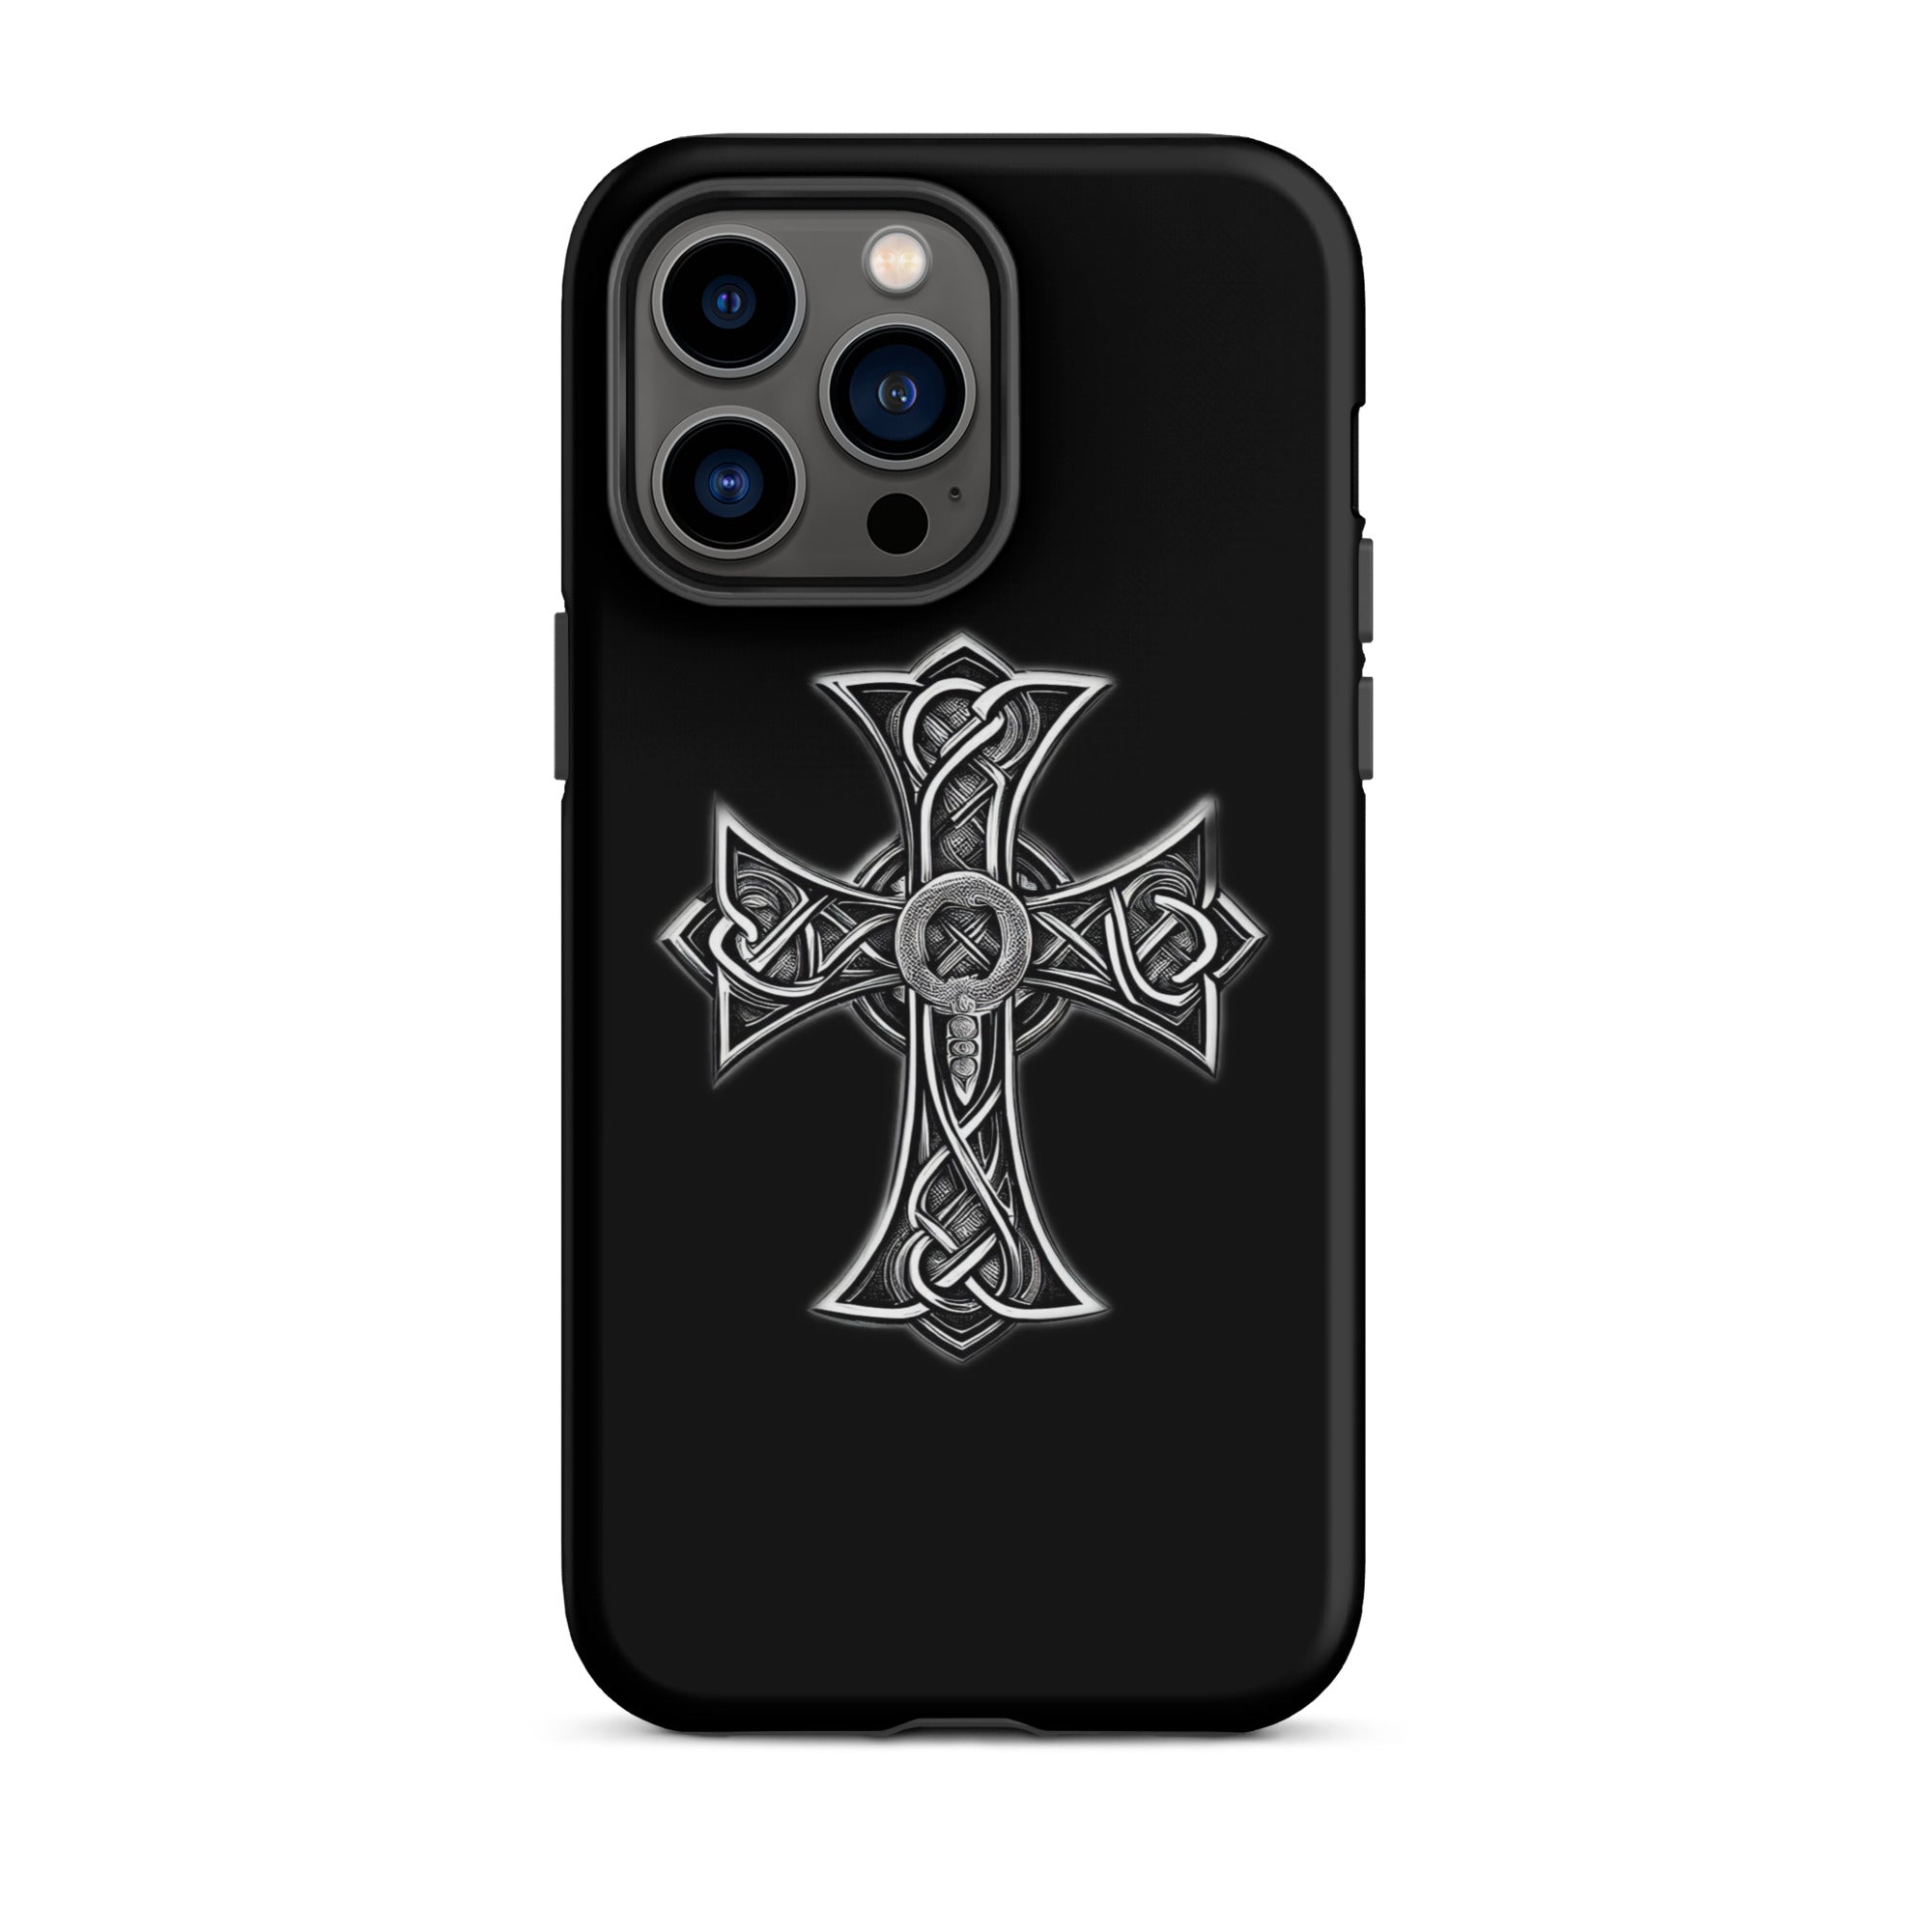 tough-case-for-iphone-matte-iphone-14-pro-max-front-6563851a37f5e.jpg